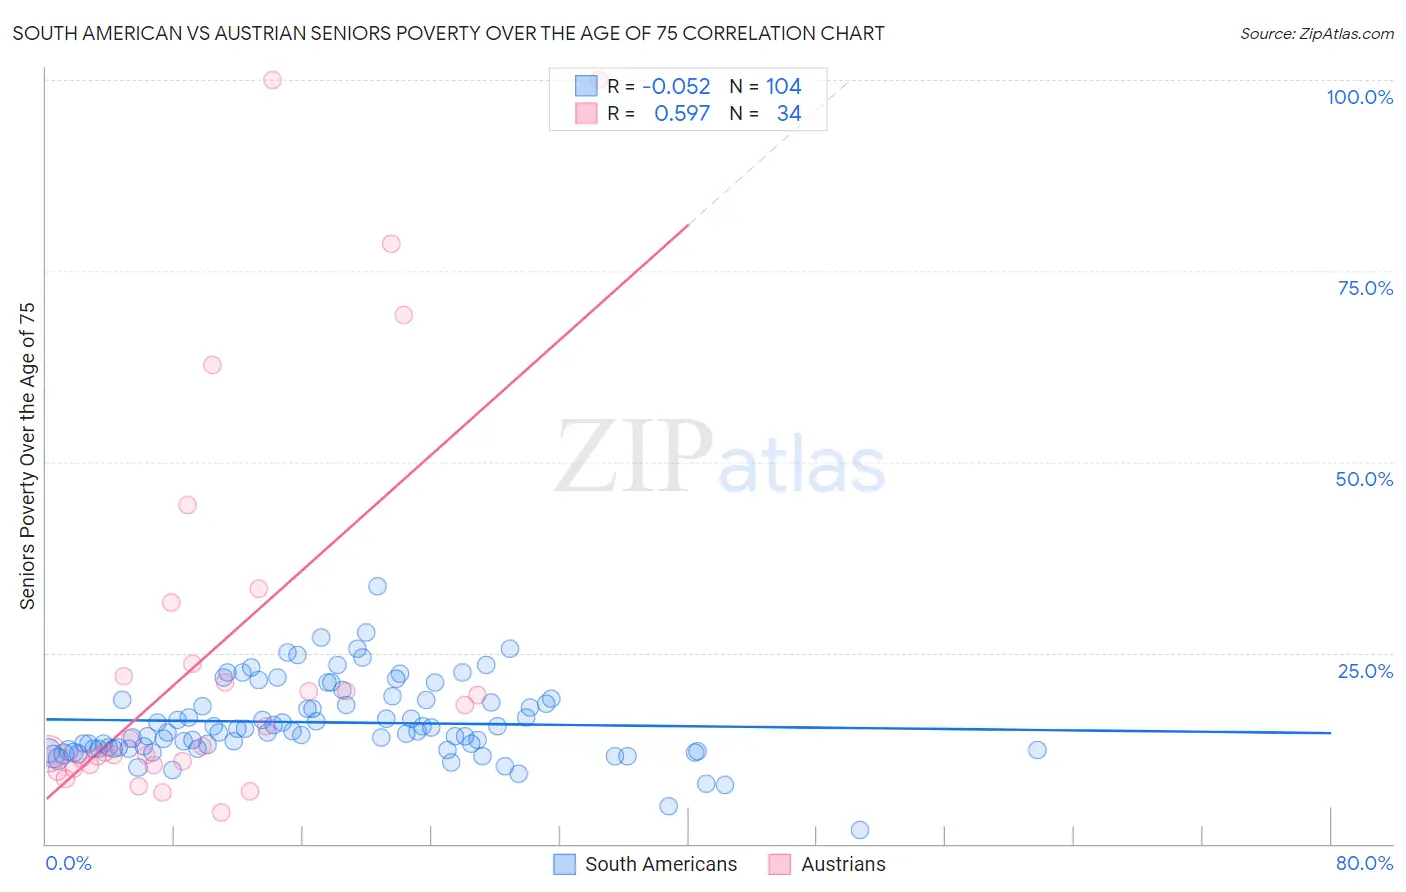 South American vs Austrian Seniors Poverty Over the Age of 75